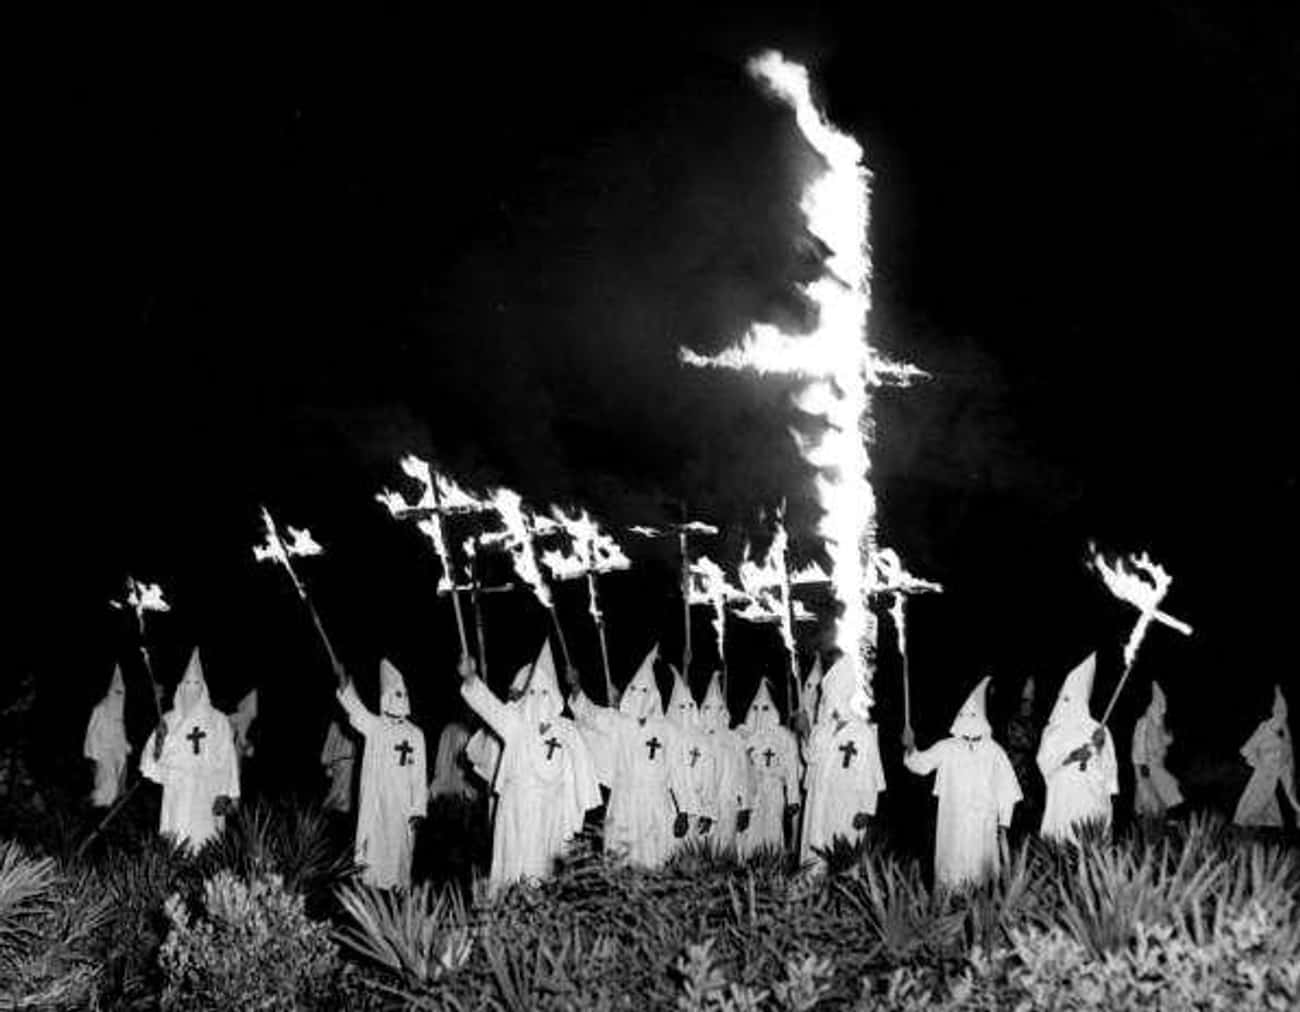 The Ku Klux Klan Invoked The Ghost Of The Confederacy To Terrorize Black Americans